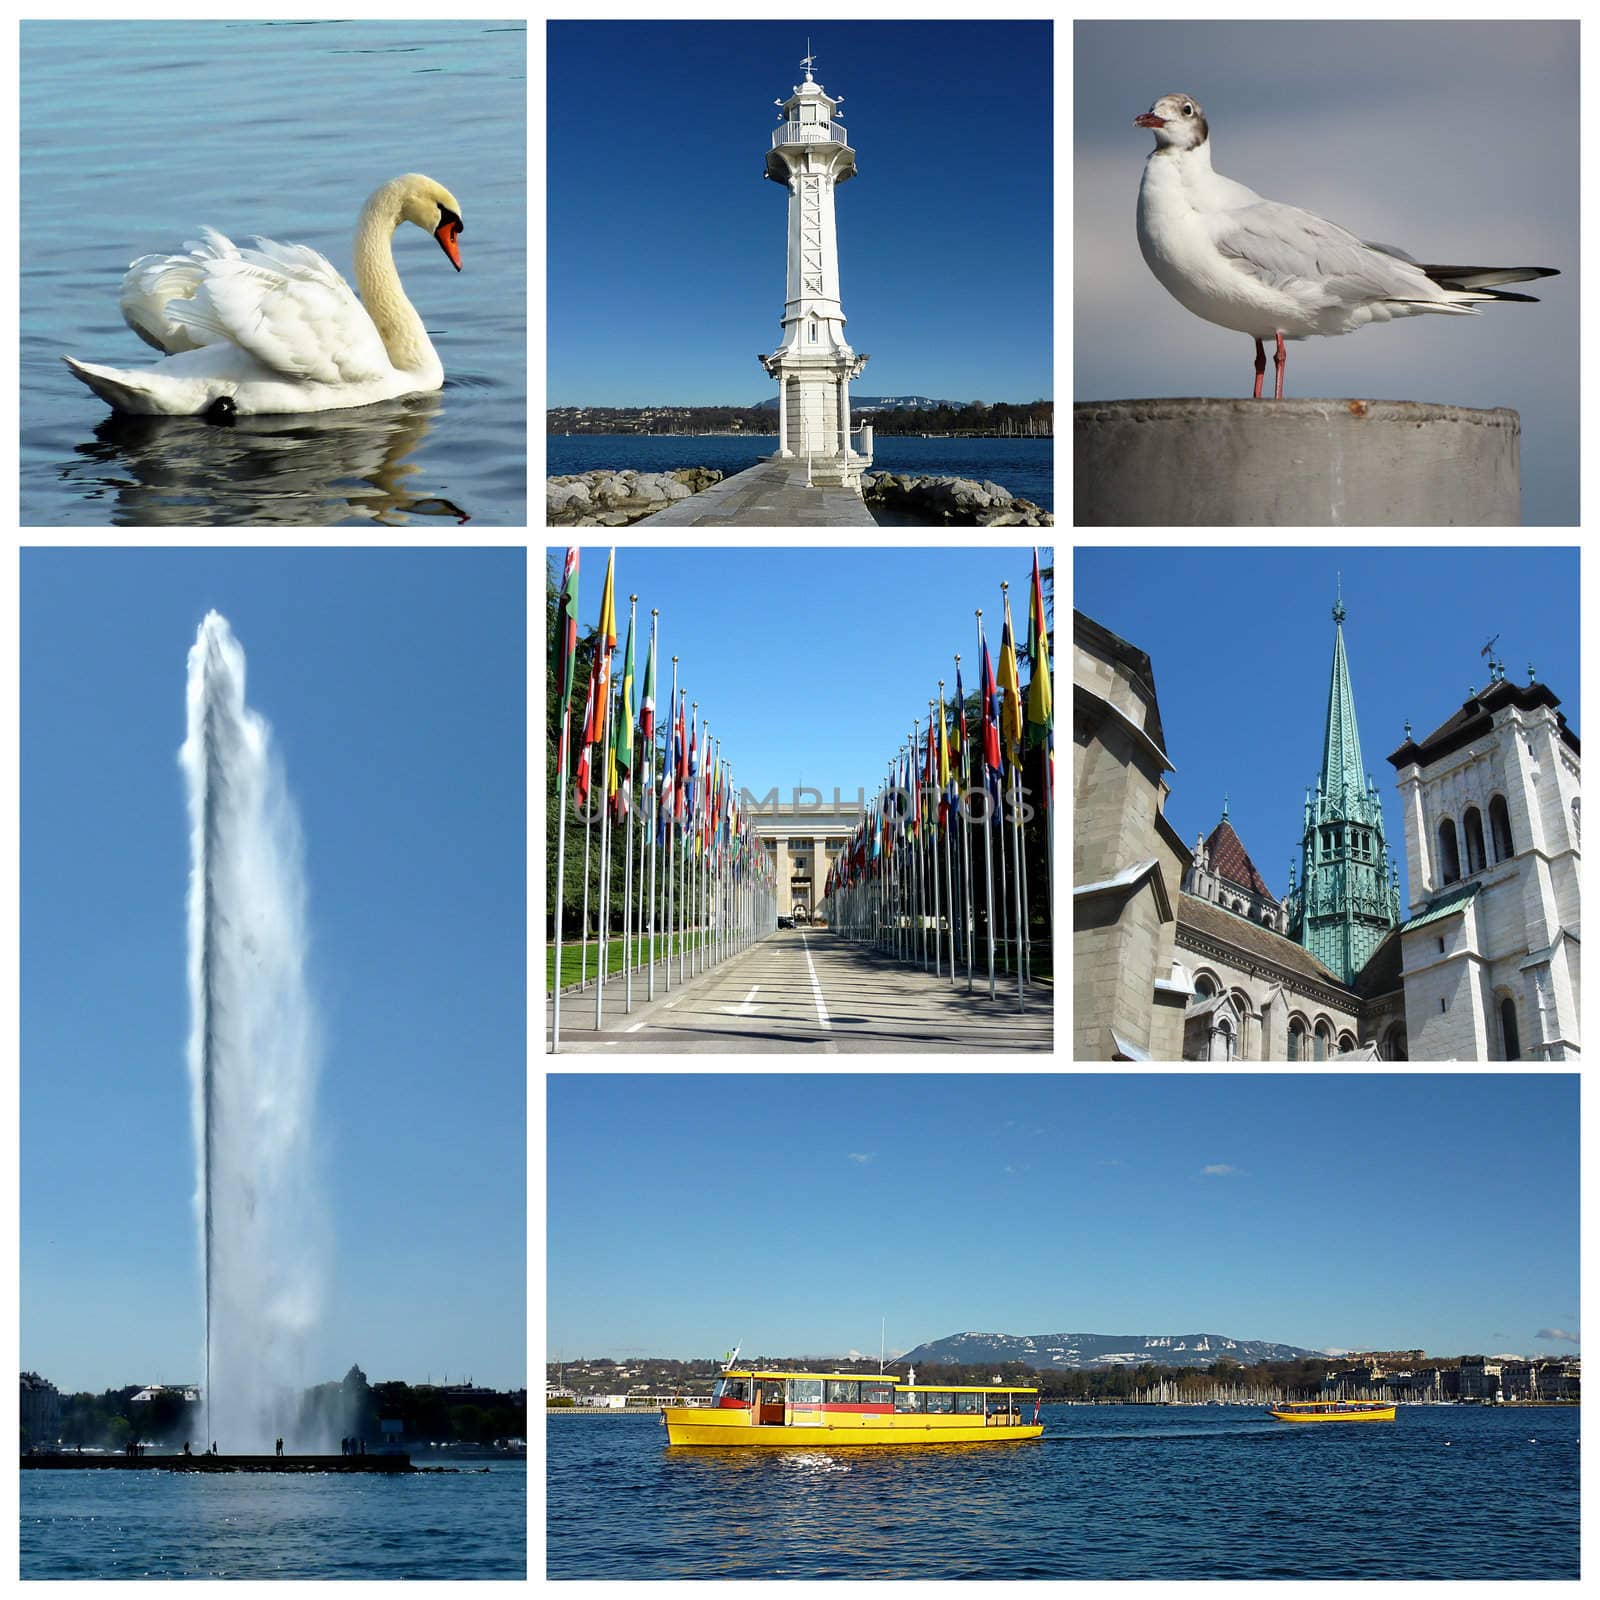 Swan, seagull, lighthouse, onu, Saint-Pierre cathedral, yellow boats and fountain for Geneva, Switzerland collage